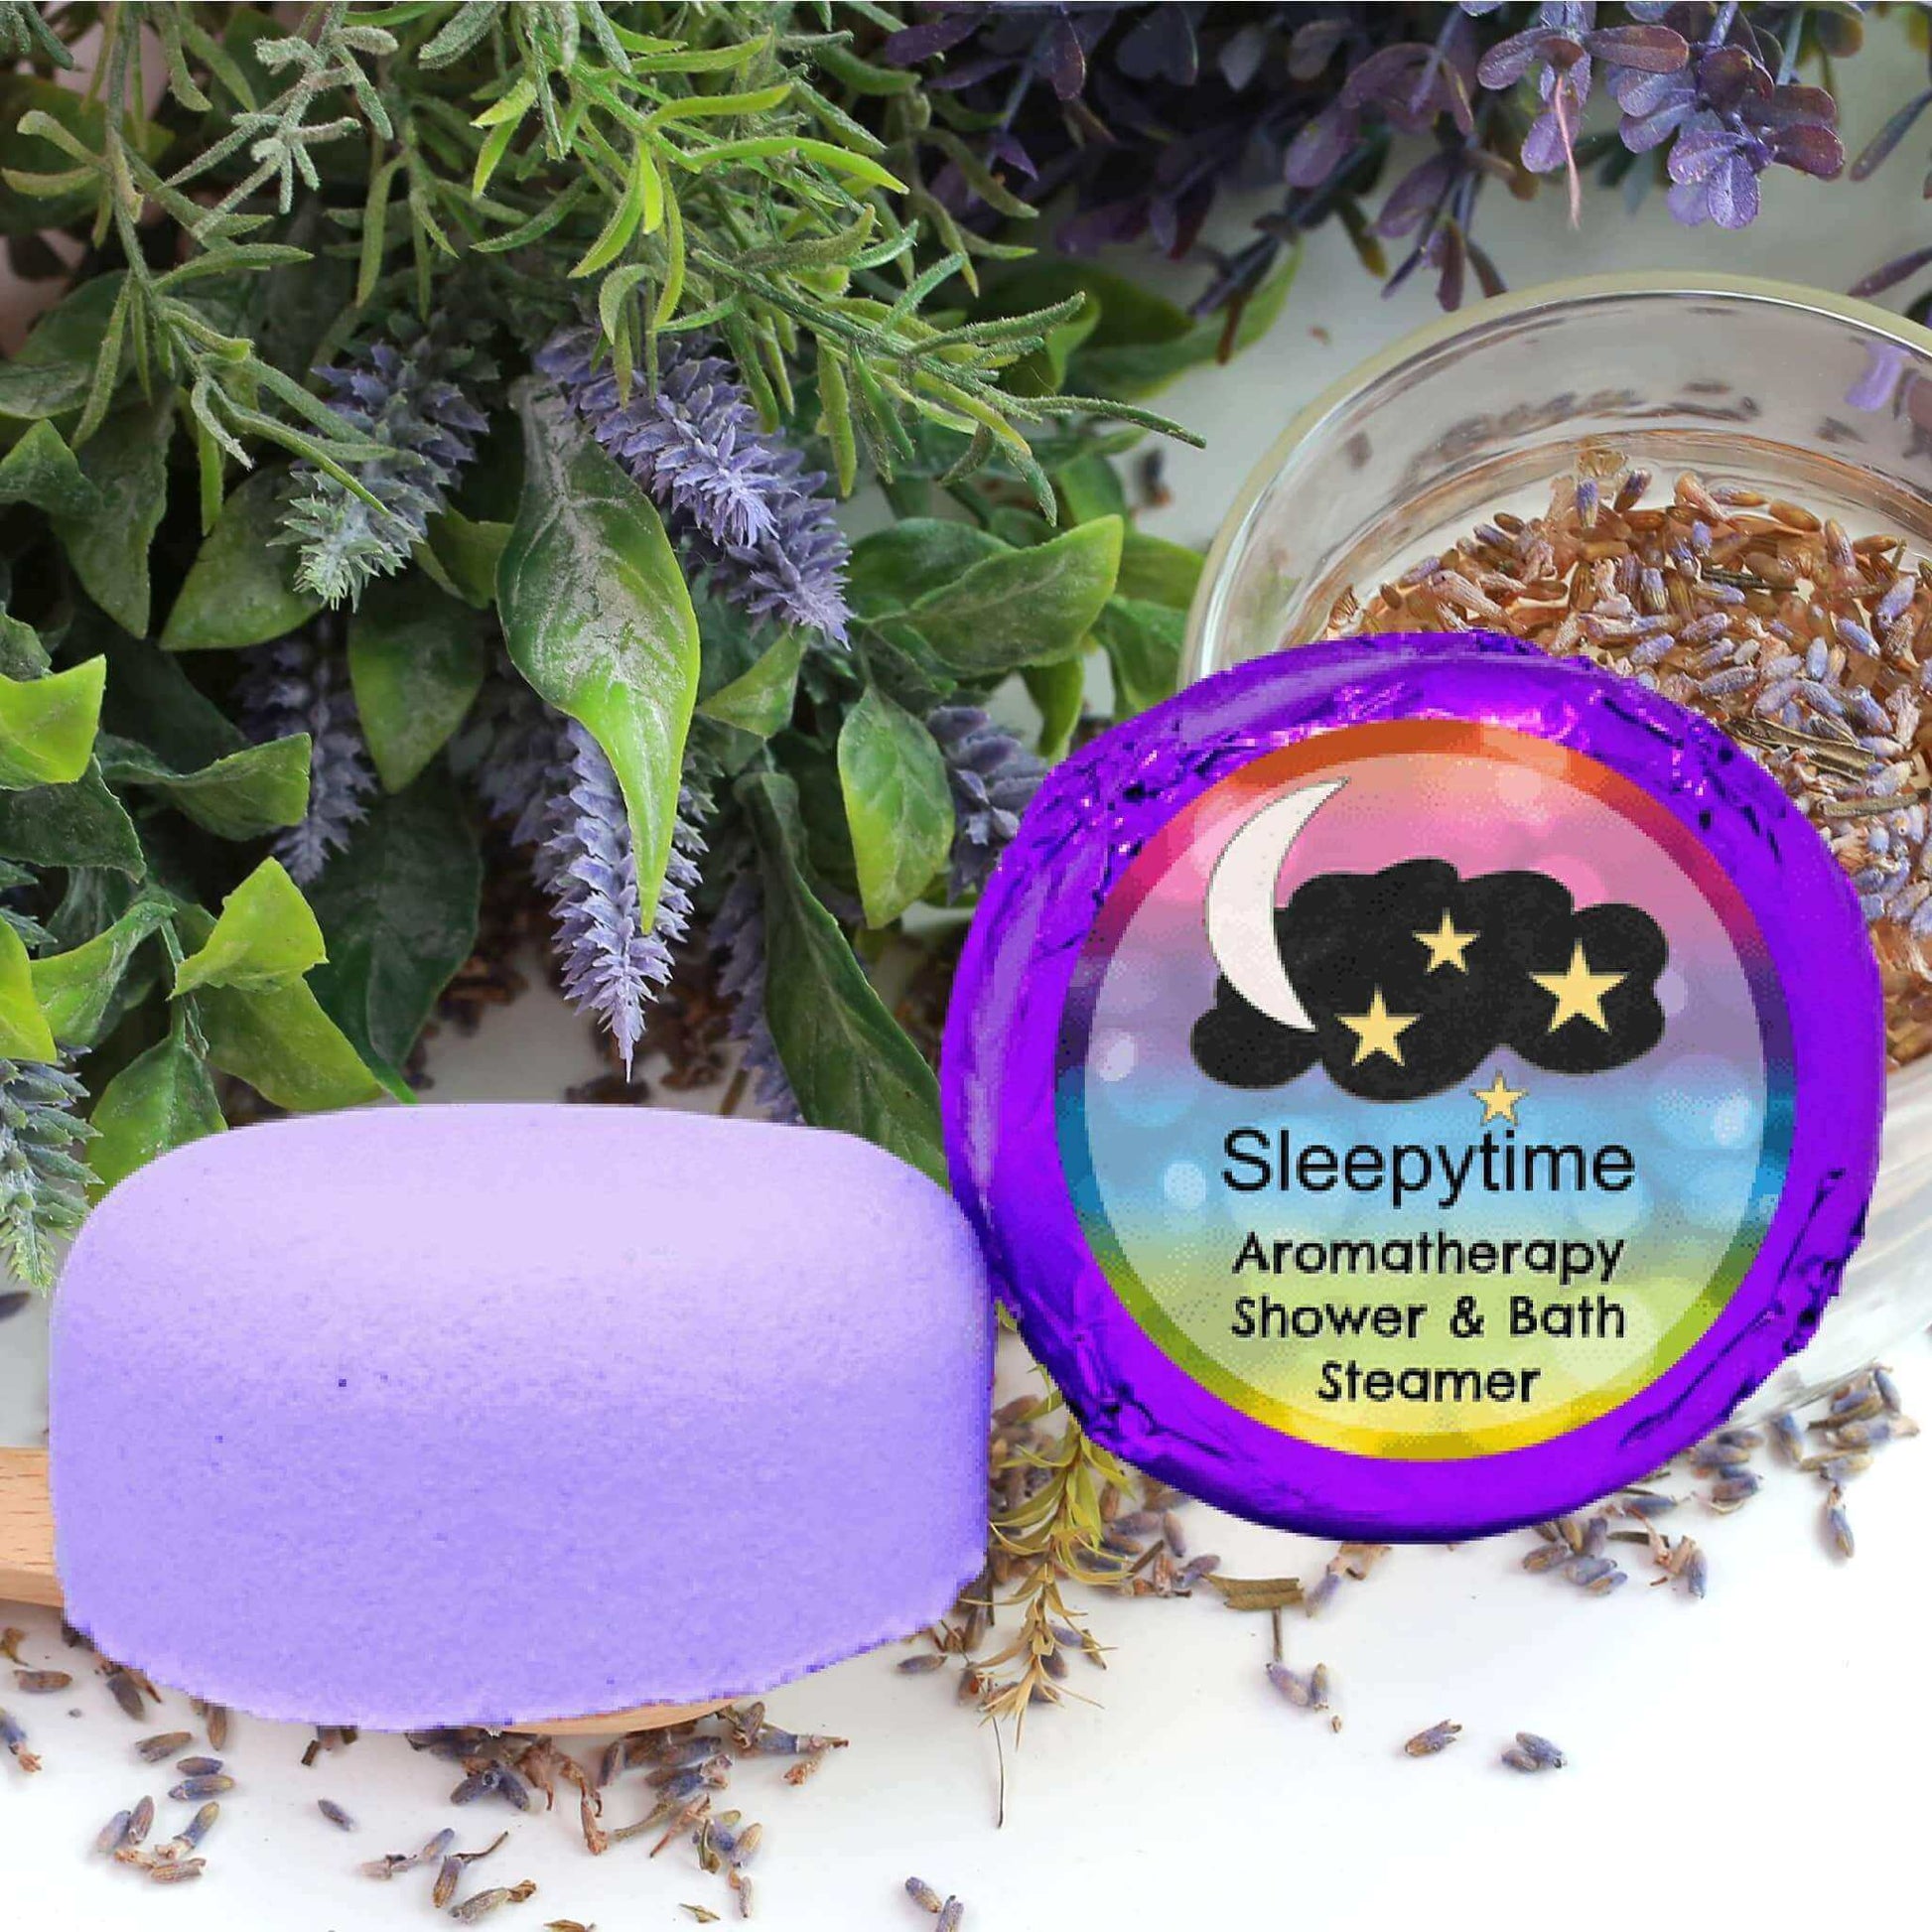 Sleepytime Shower Steamer - your new sleep aid! Enhance your bedtime routine with our soothing aromatherapy shower steamer.